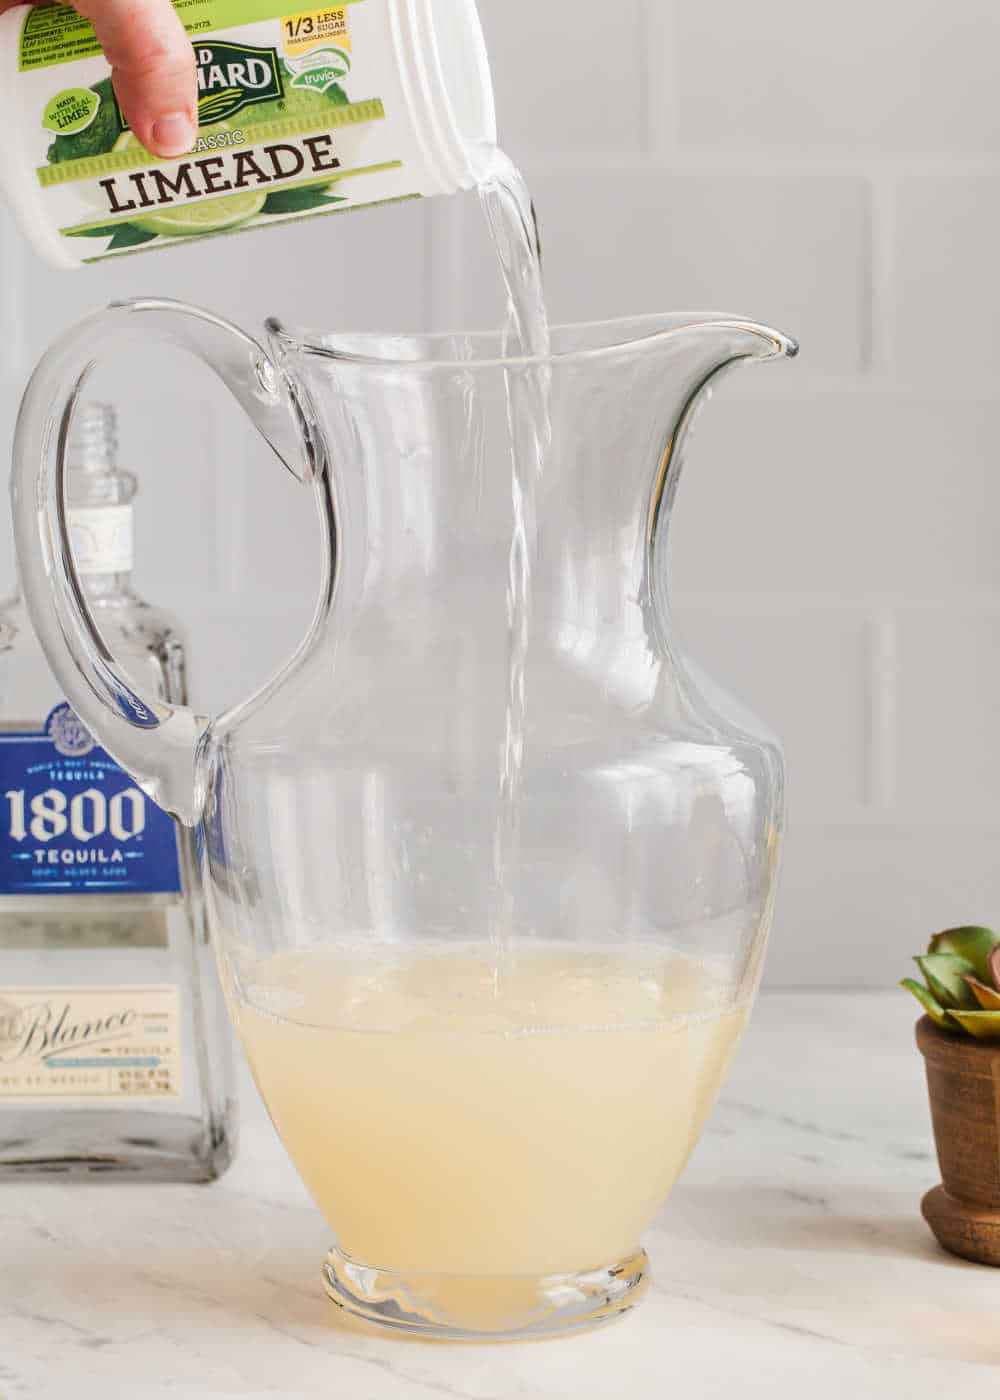 pouring limeade into pitcher.